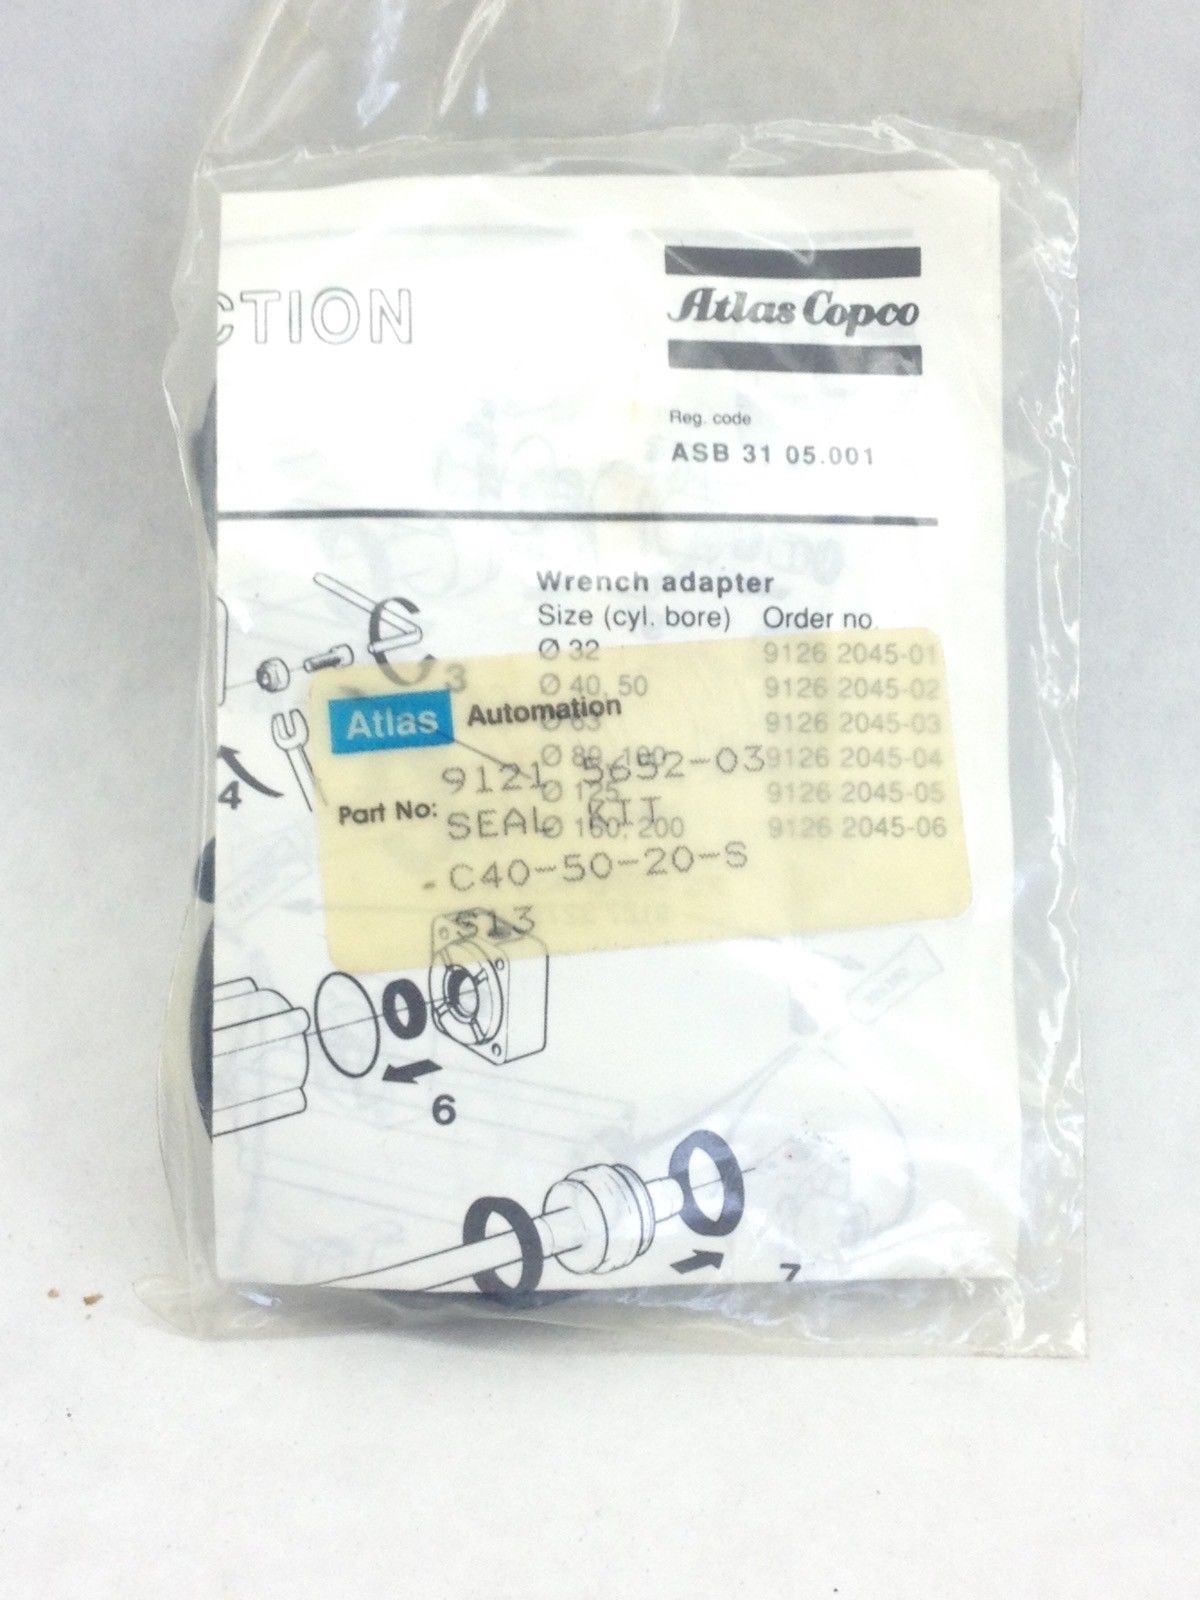 ATLAS COPCO AUTOMATION 9121-5652-03 SEAL KIT C40-50-20-SS13 (H3) 1